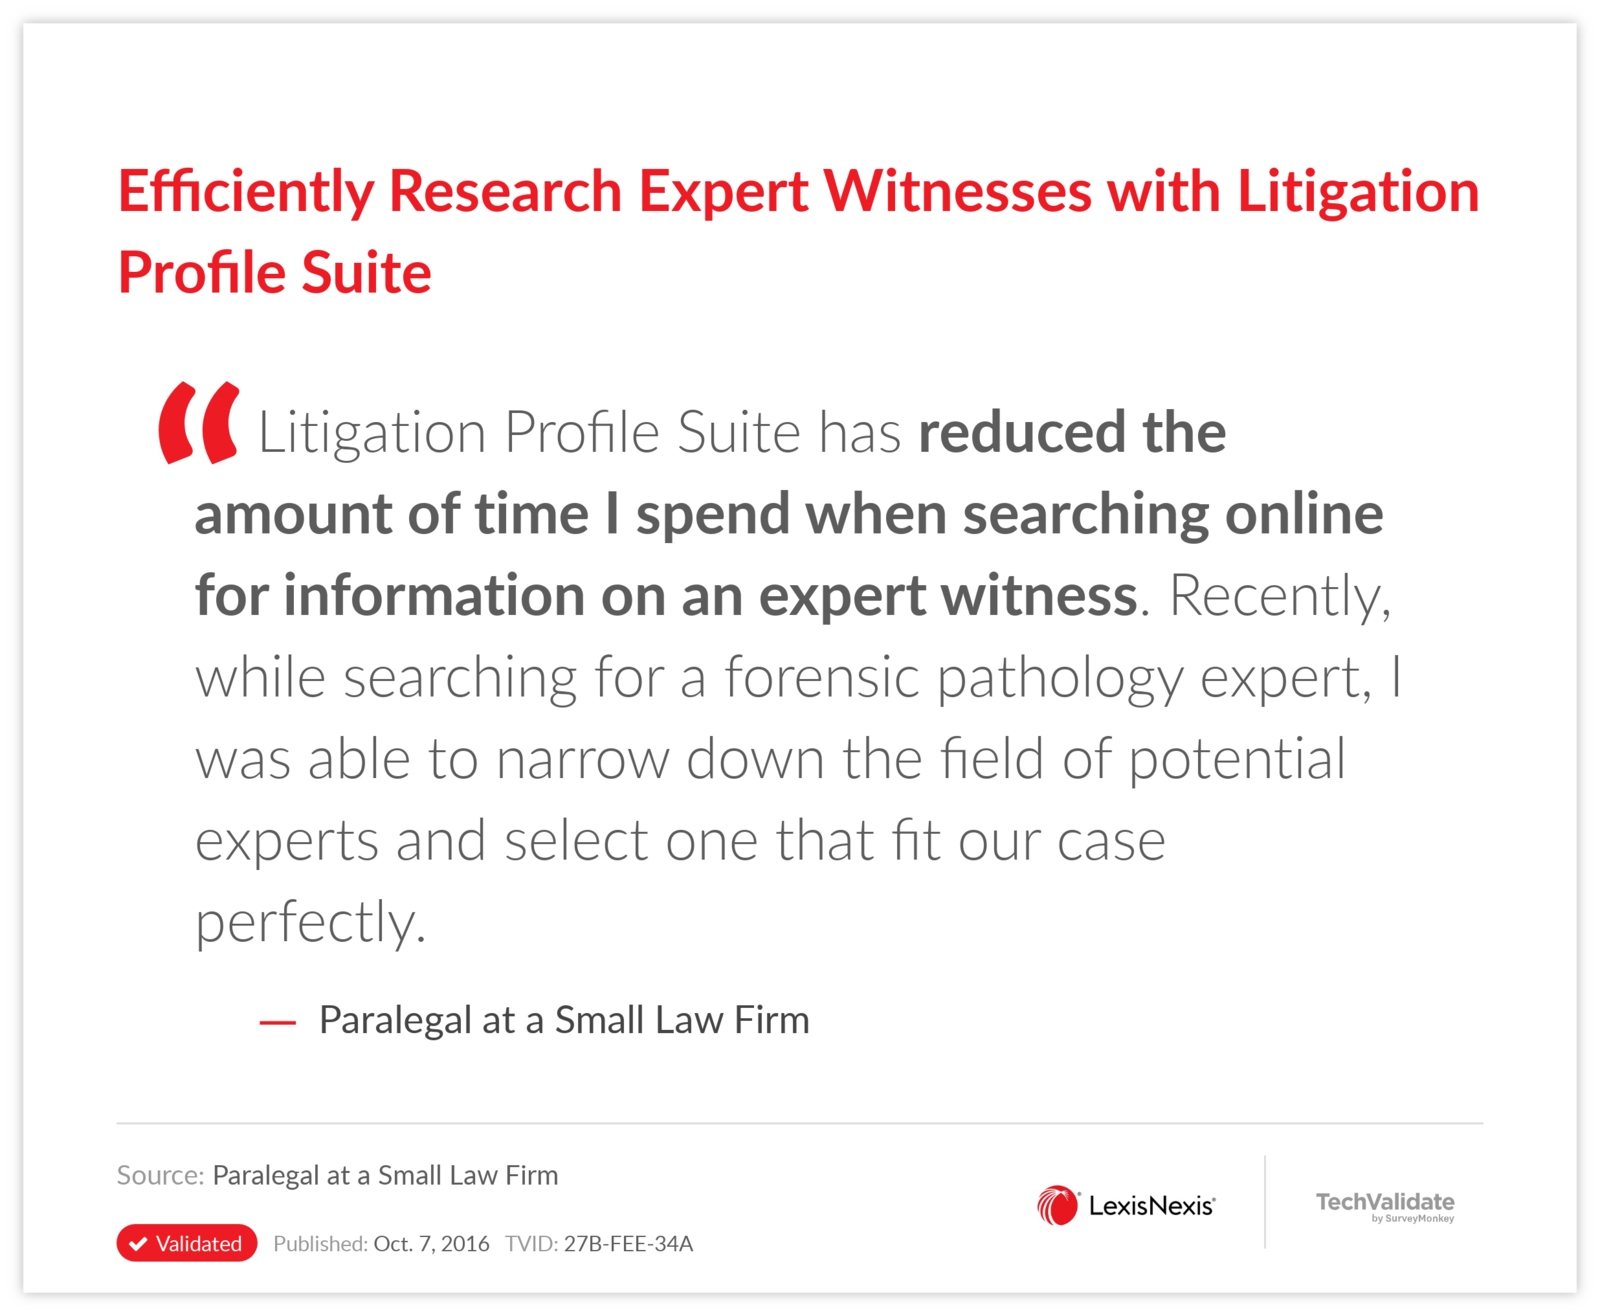 Efficiently Research Expert Witnesses with Litigation Profile Suite